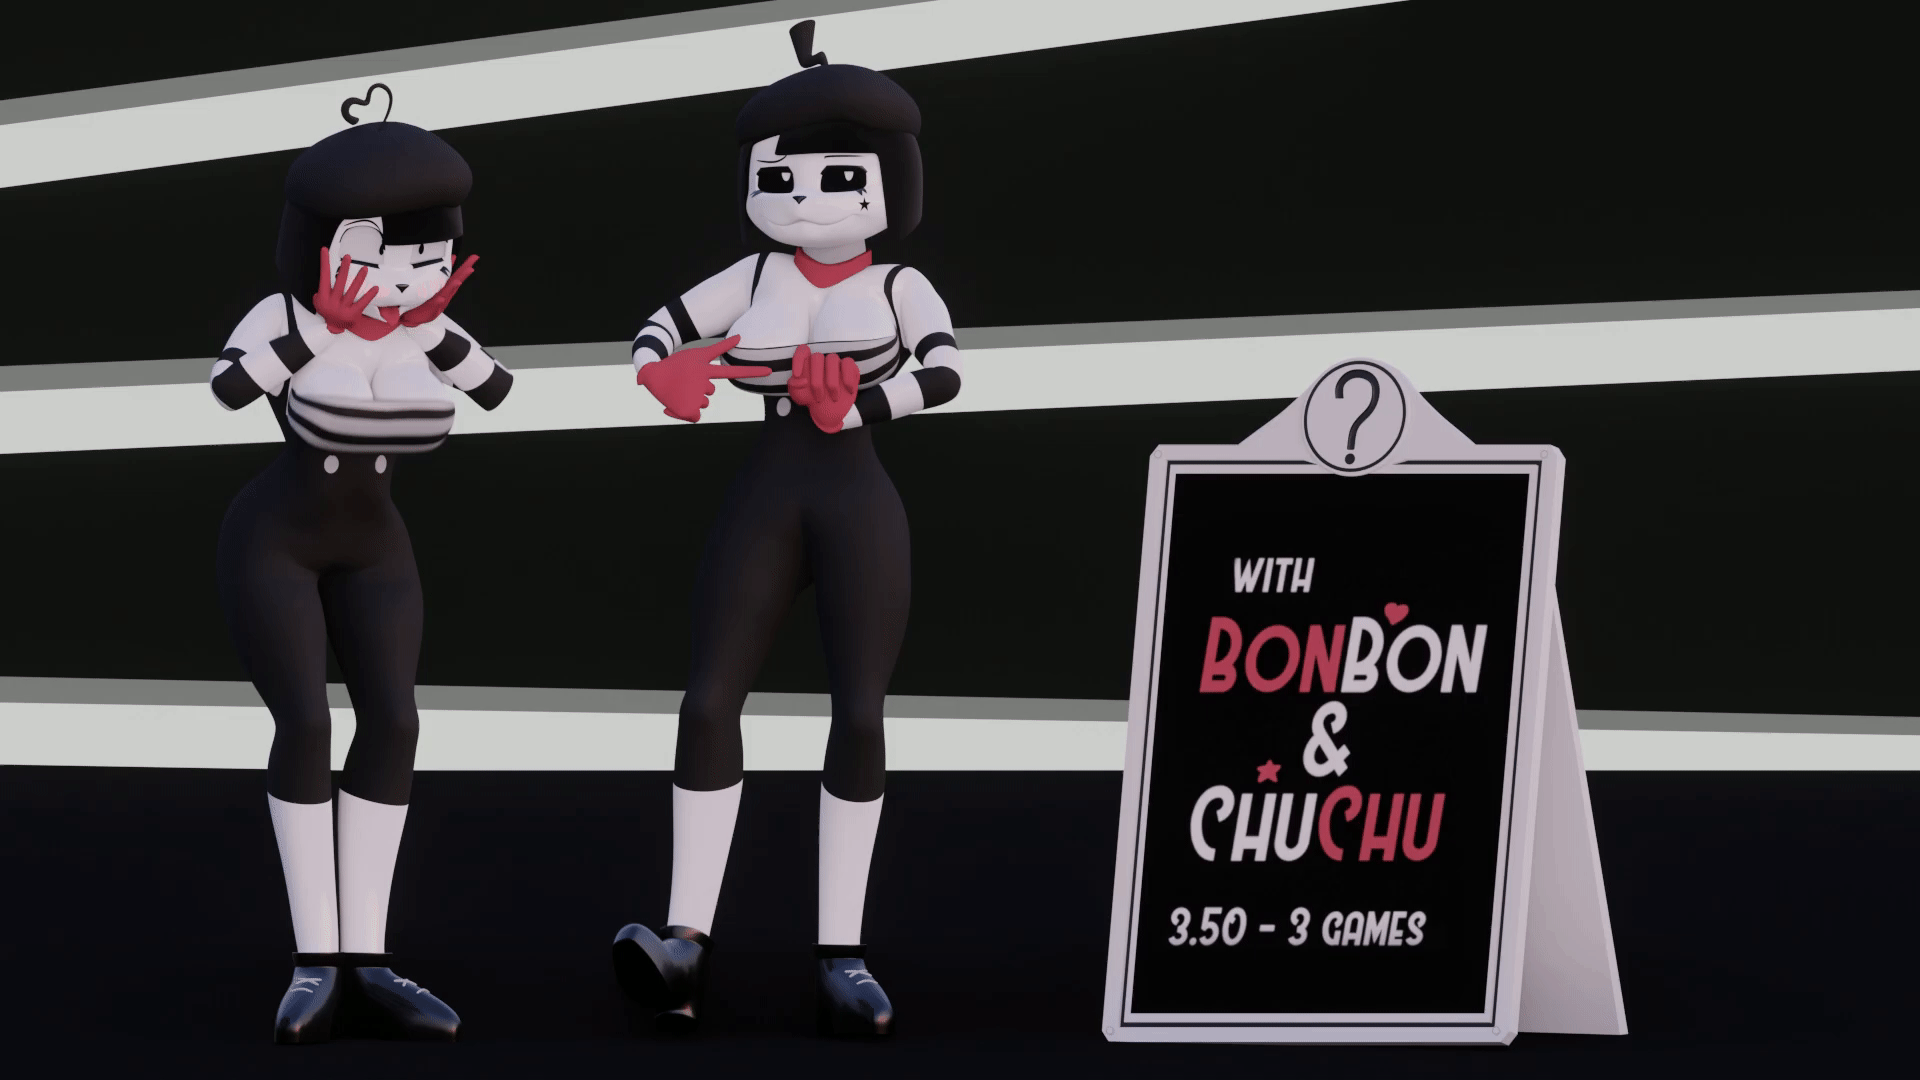 I wanted to make Chu Chu from Mime and Dash, the completely